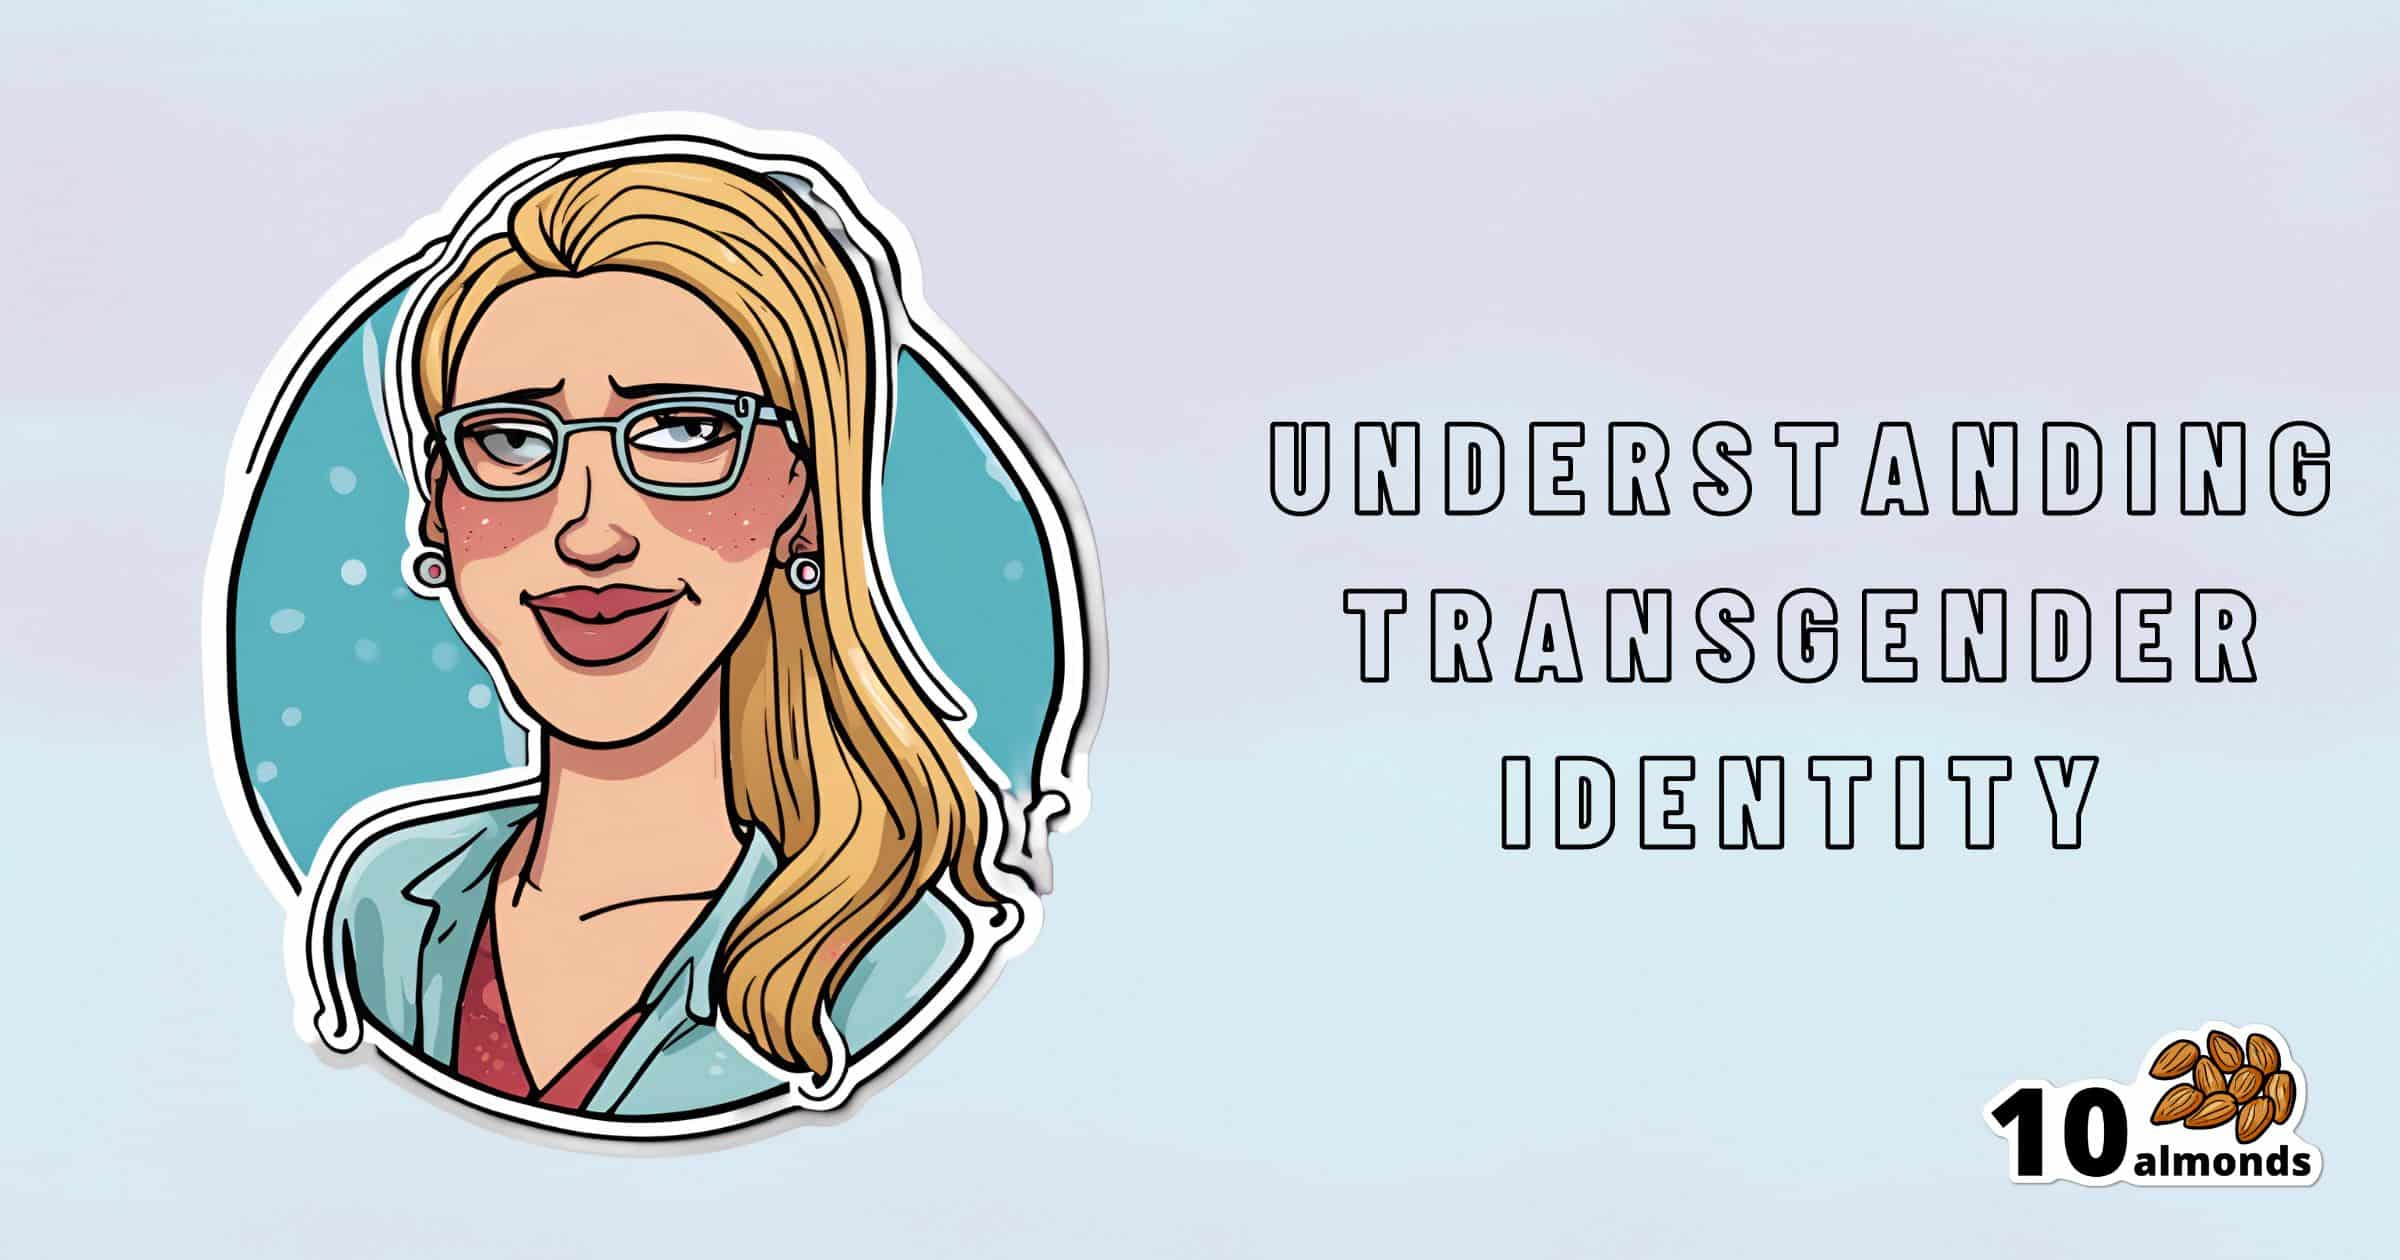 A cartoon illustration of a person with long blonde hair, glasses, and a blue jacket appears on the left side of the image. On the right side, text reads “Understanding Transgender Identity.” The bottom right corner features “10 almonds” and an almond icon.